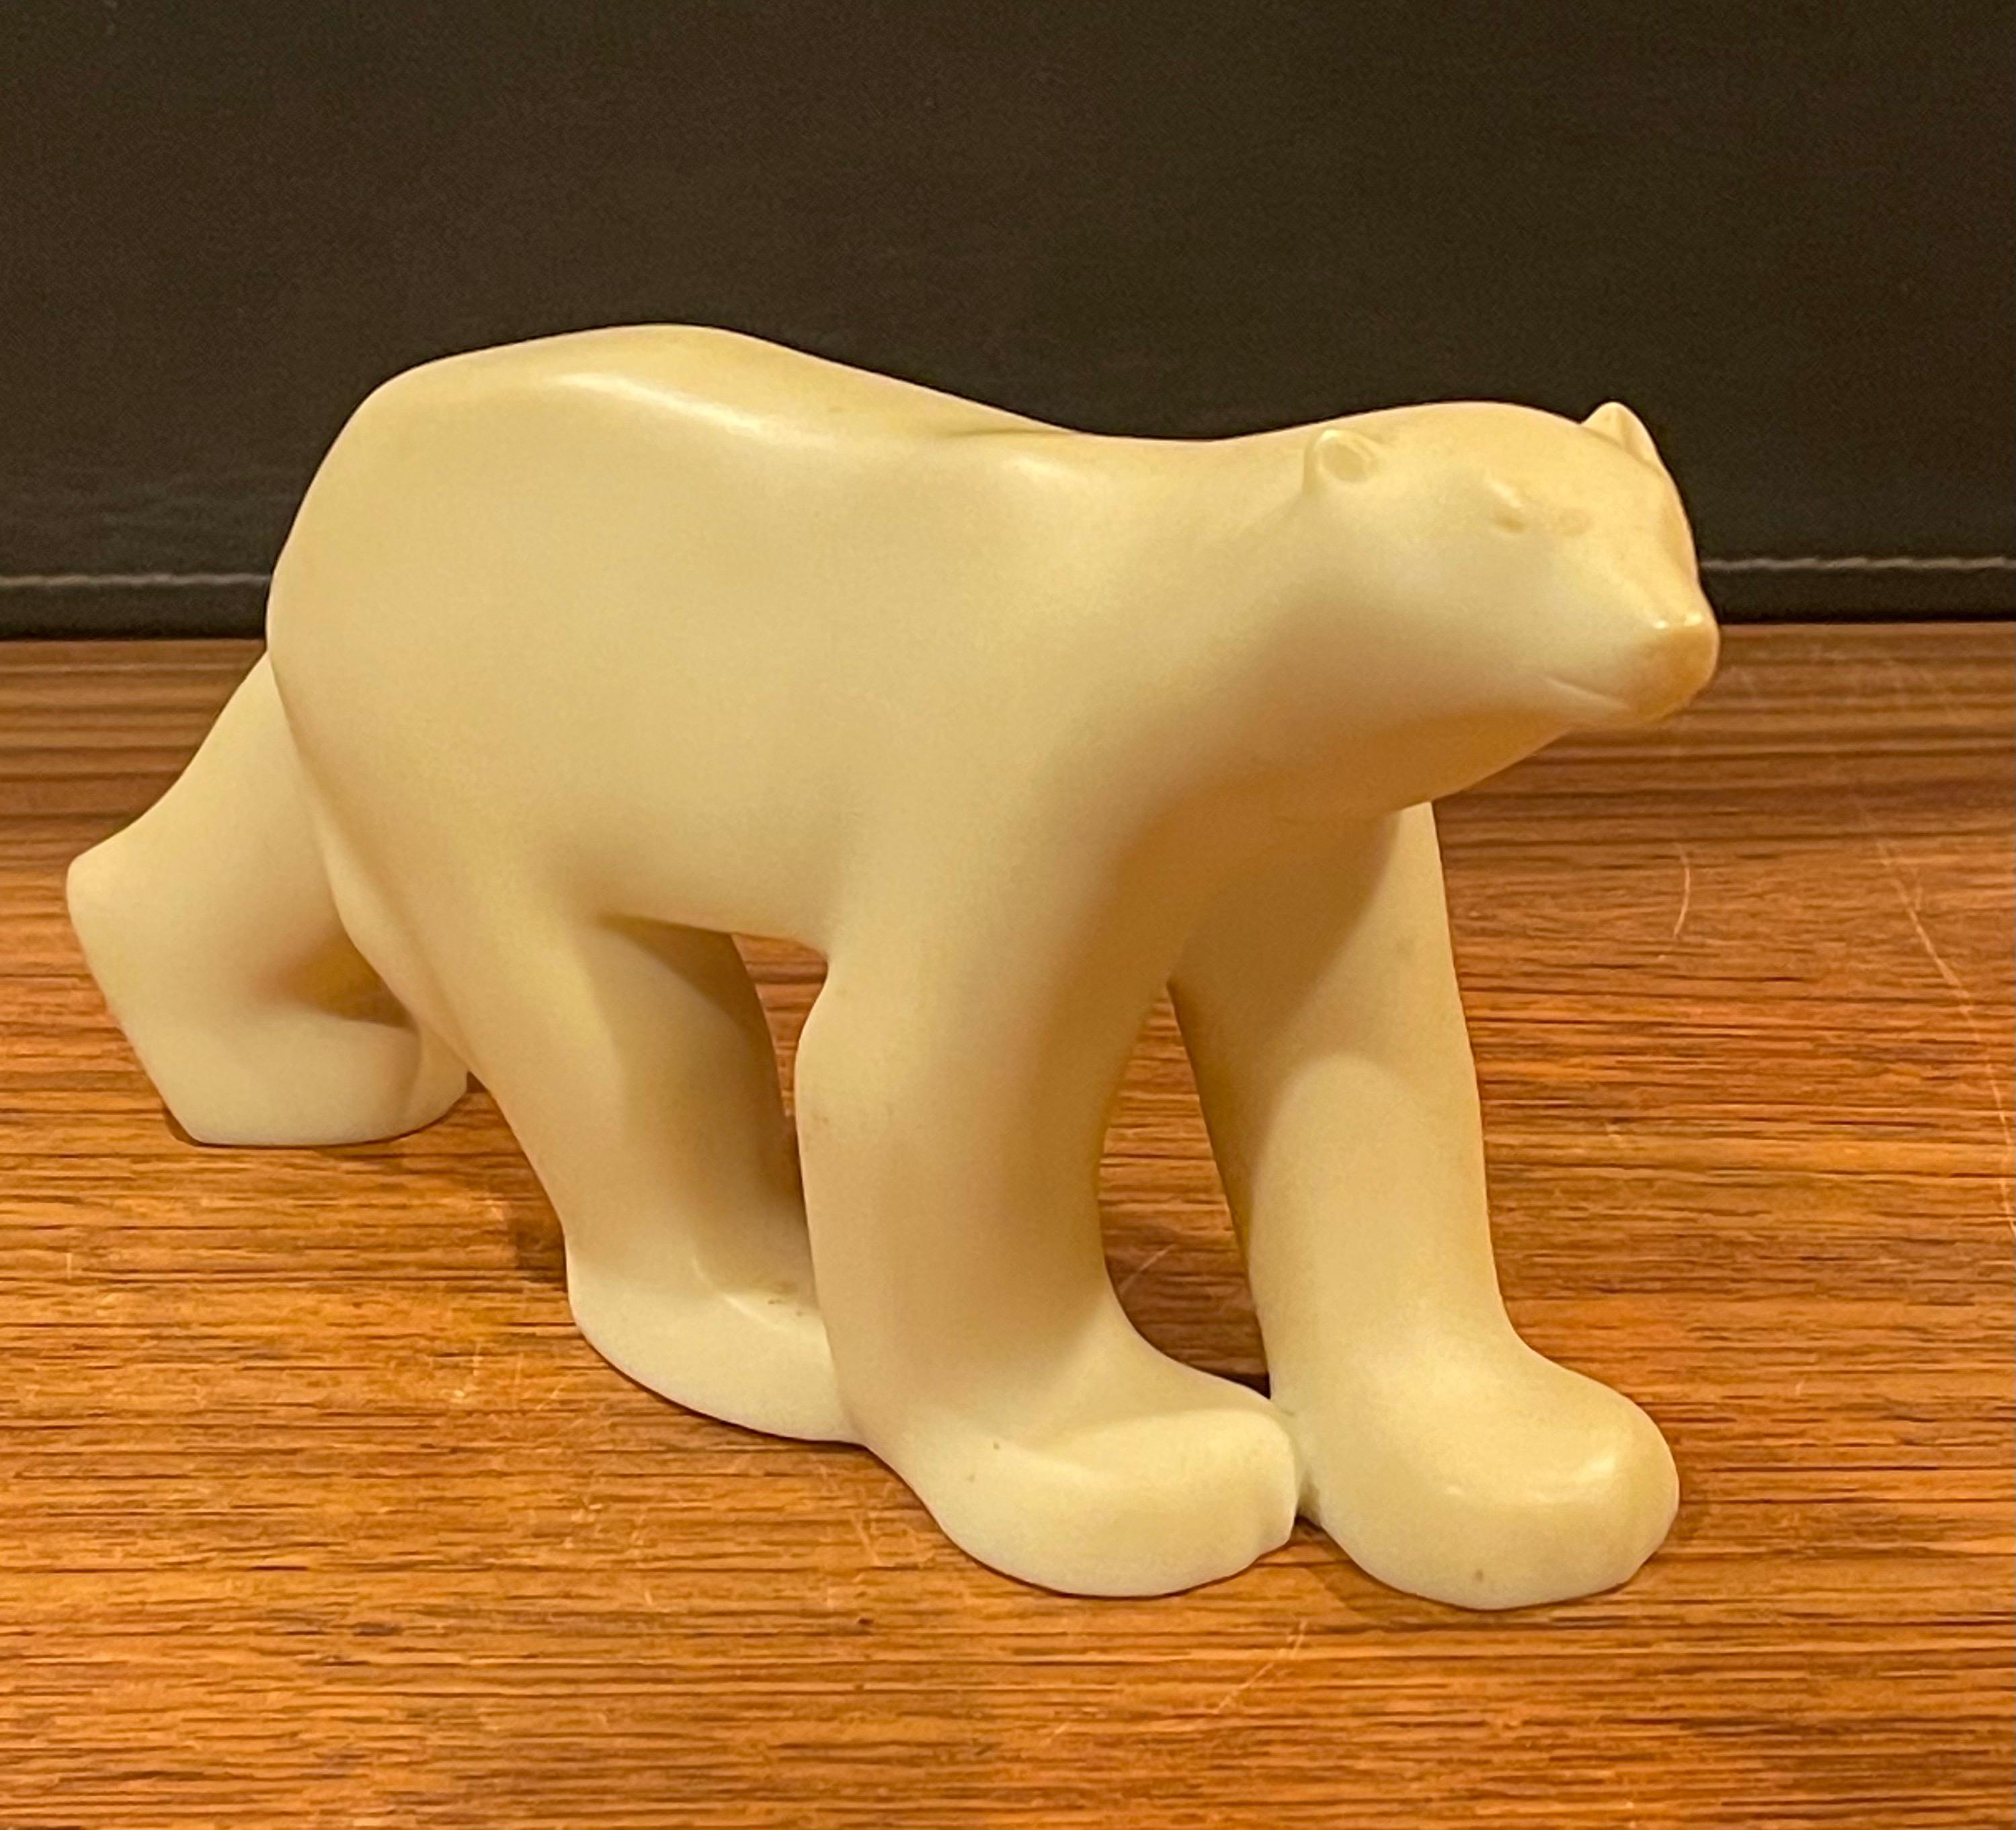 American Cast Resin Polar Bear Sculpture by Francois Pompon for the Moma Collection For Sale